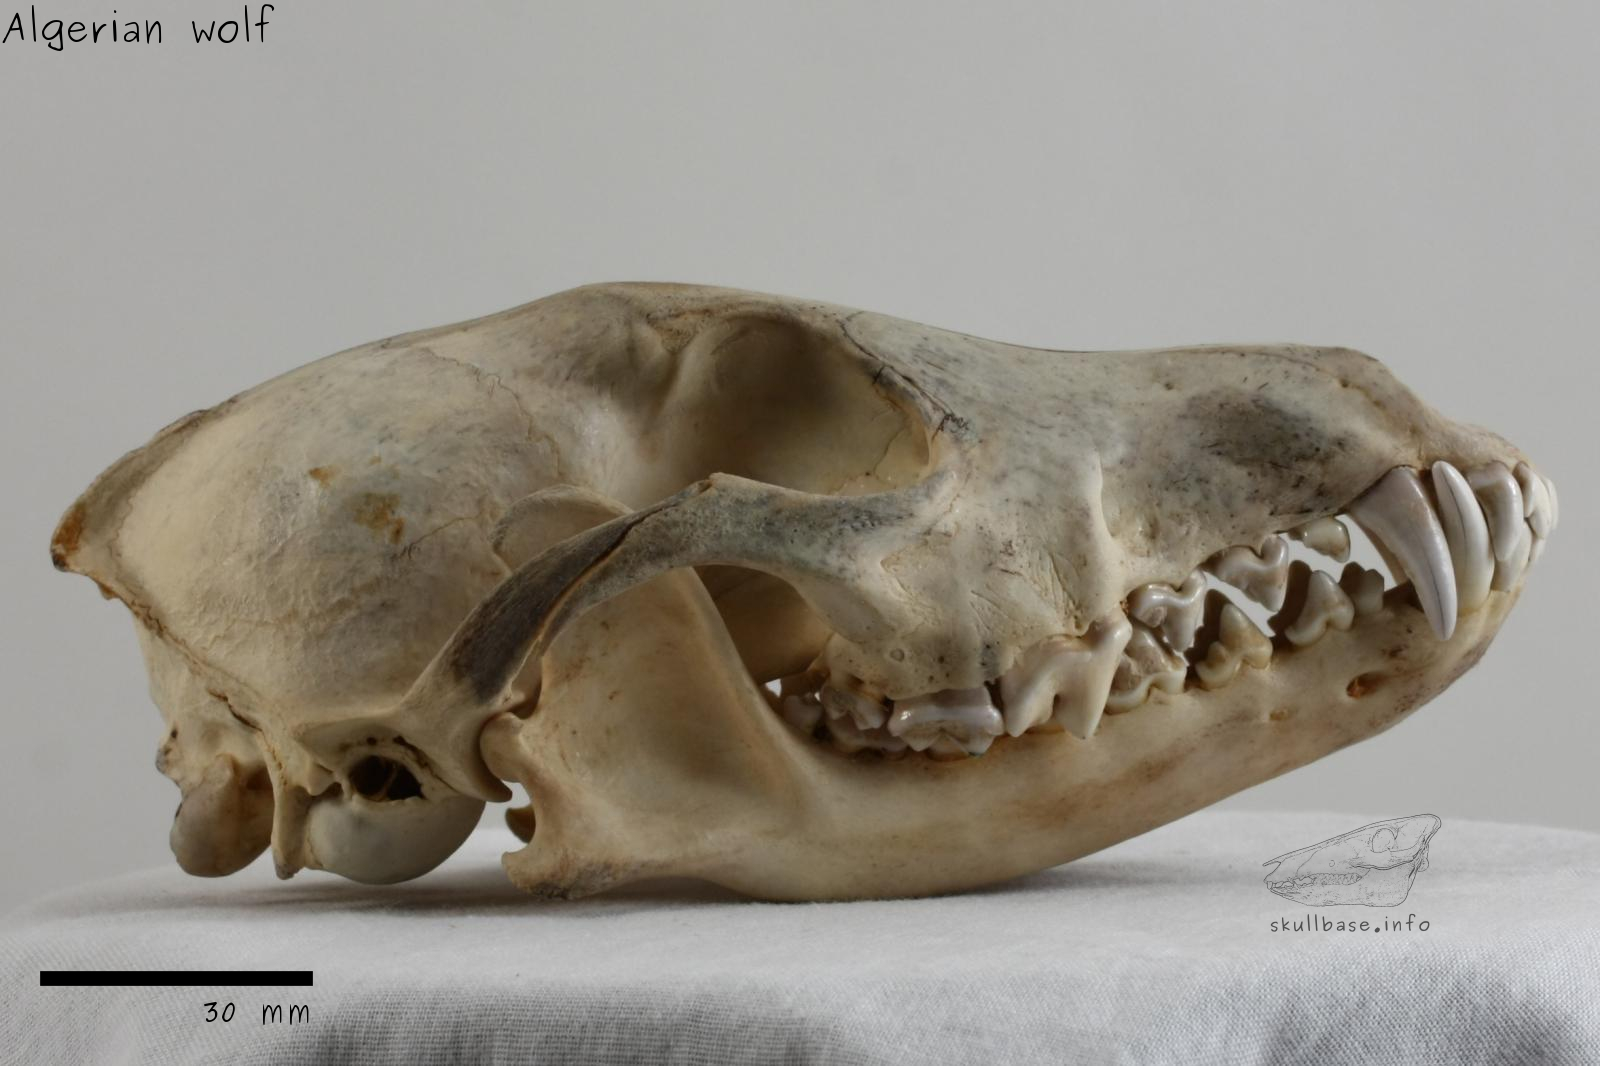 Algerian wolf (Canis anthus algirensis) skull lateral view